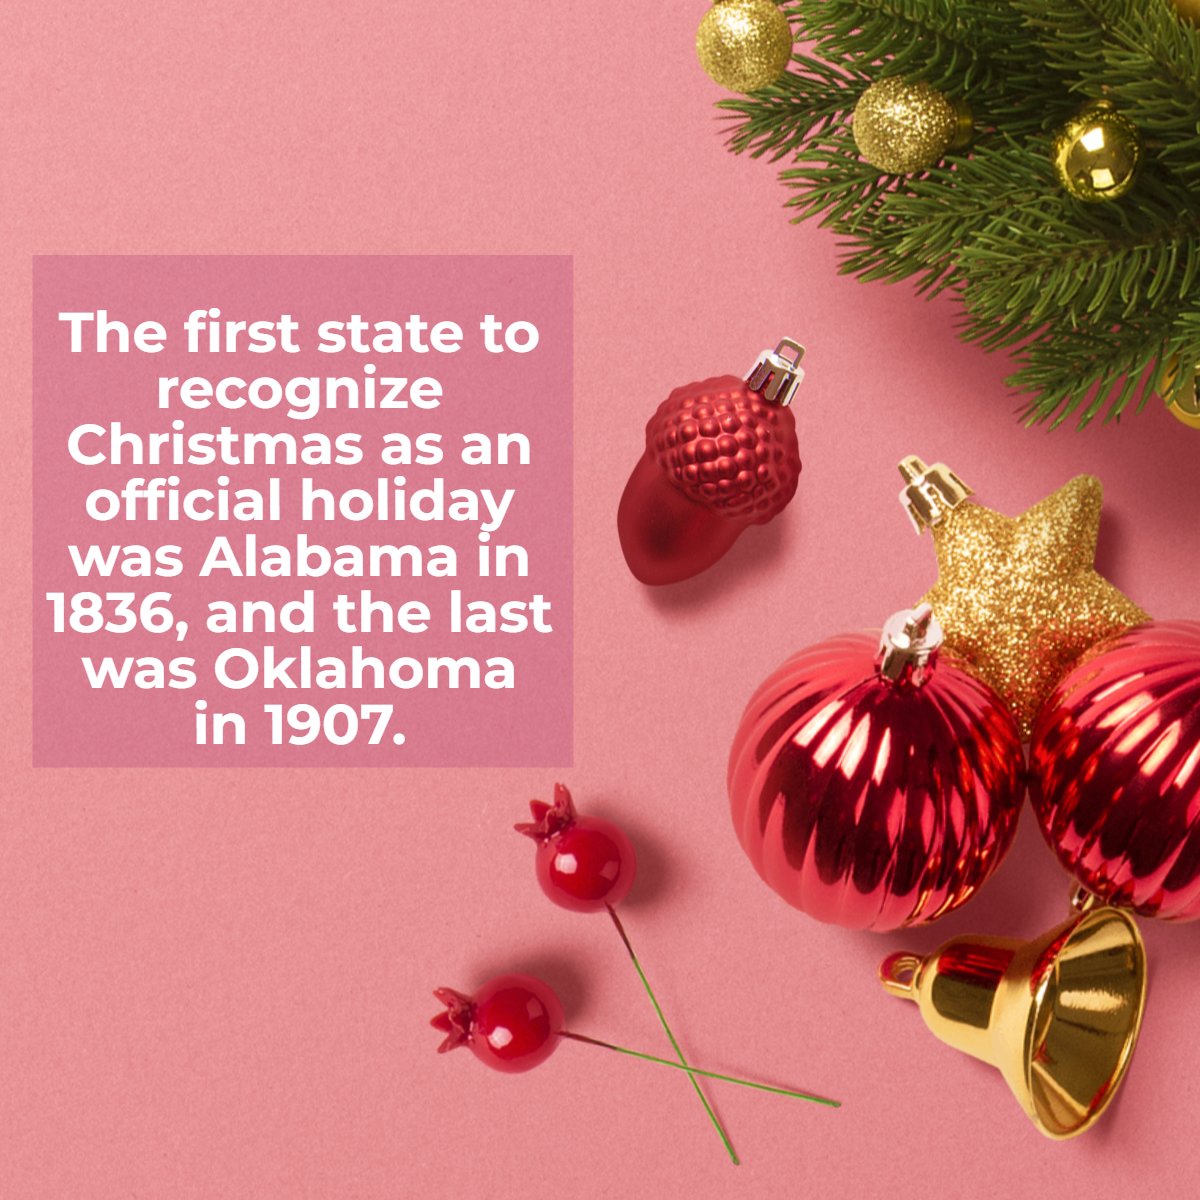 It's almost Christmas! 🎄

Here are some interesting facts for you.

#christmastime #christmasmood #interestingfacts  #didyouknowfacts 
 #TheFryGroup #IknowRealEstate #TwinCitiesRealEstate #LocalExpert